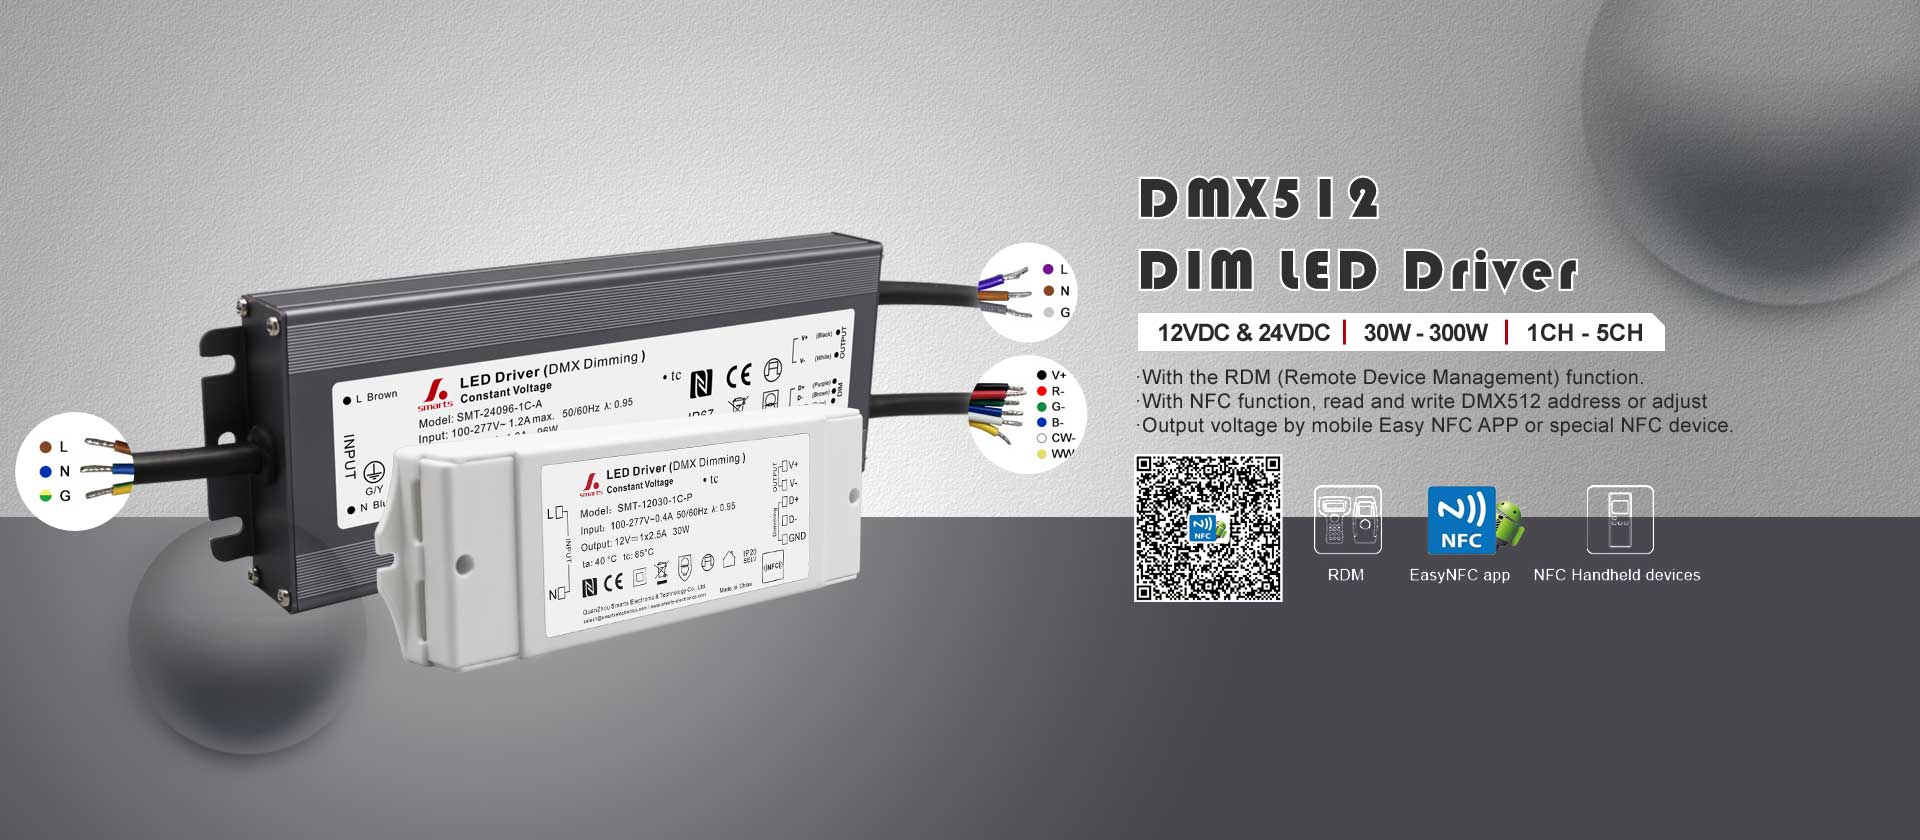 DMX512 Dimmable LED Driver